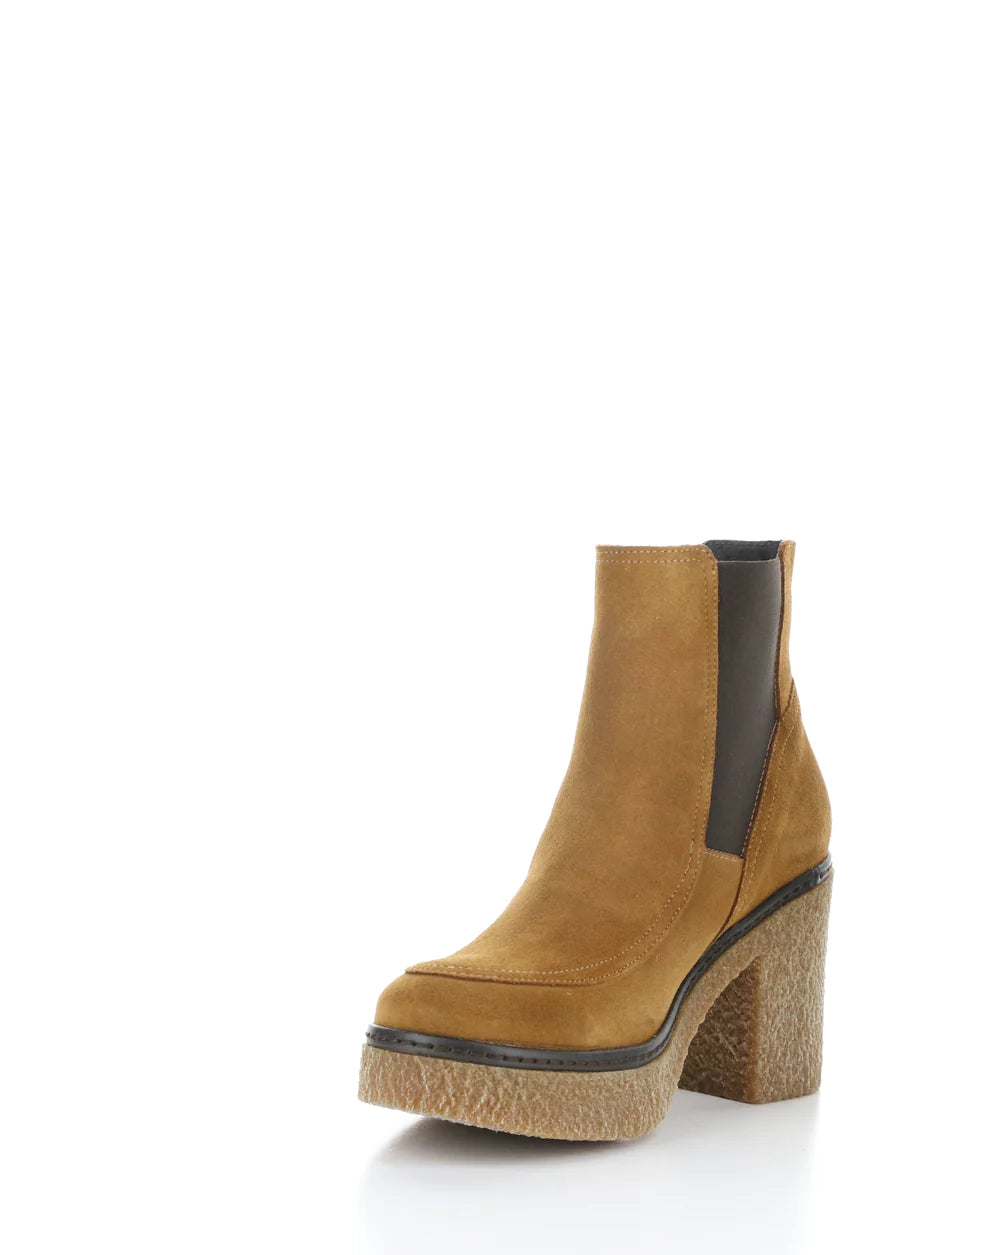 Bos and Co Papio Camel Suede Elastic Slip On Bootie